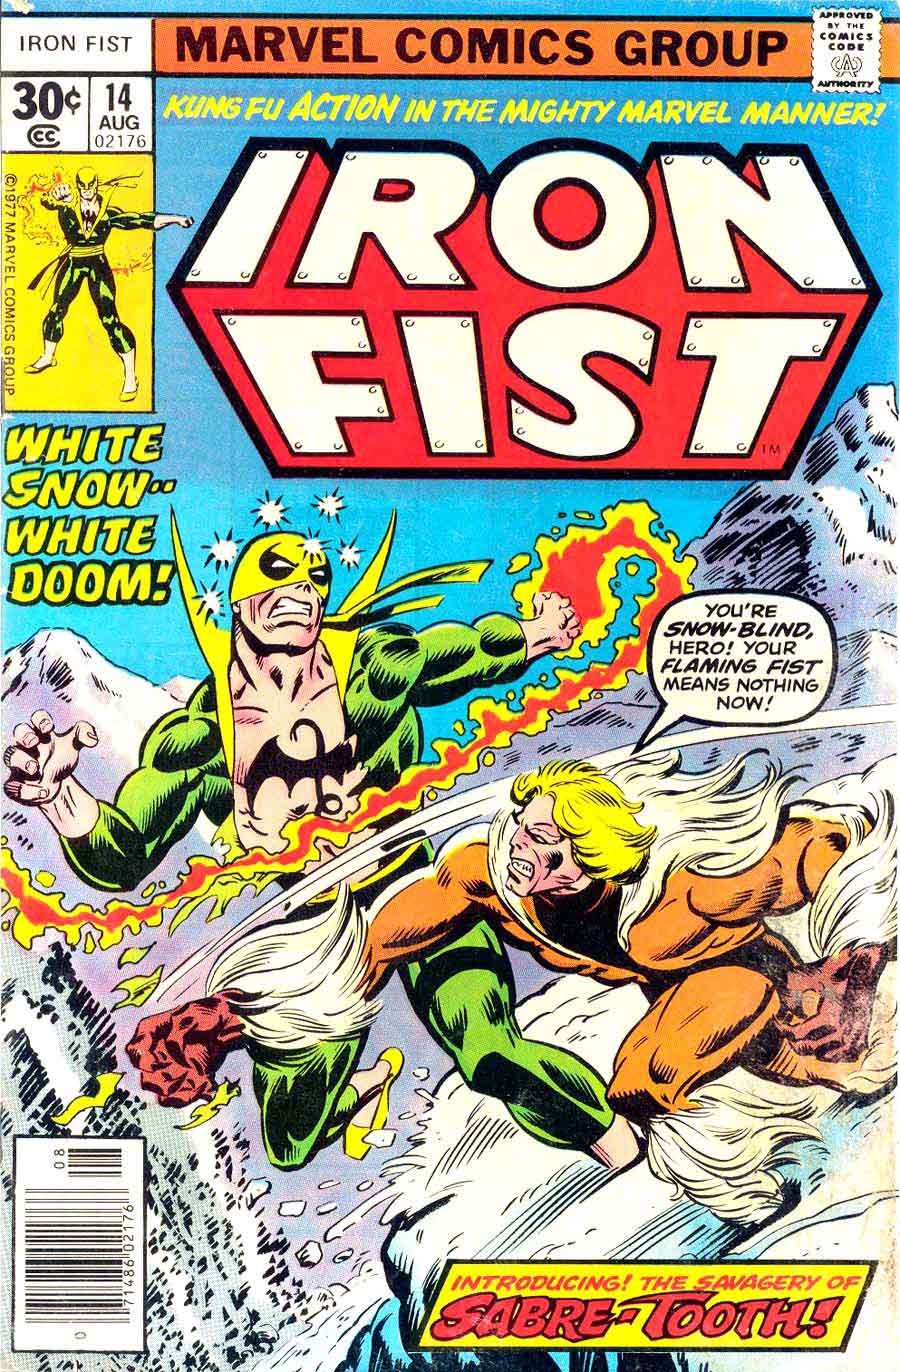 Iron Fist #14 marvel key issue 1970s bronze age comic book cover - 1st appearance Sabre-Tooth